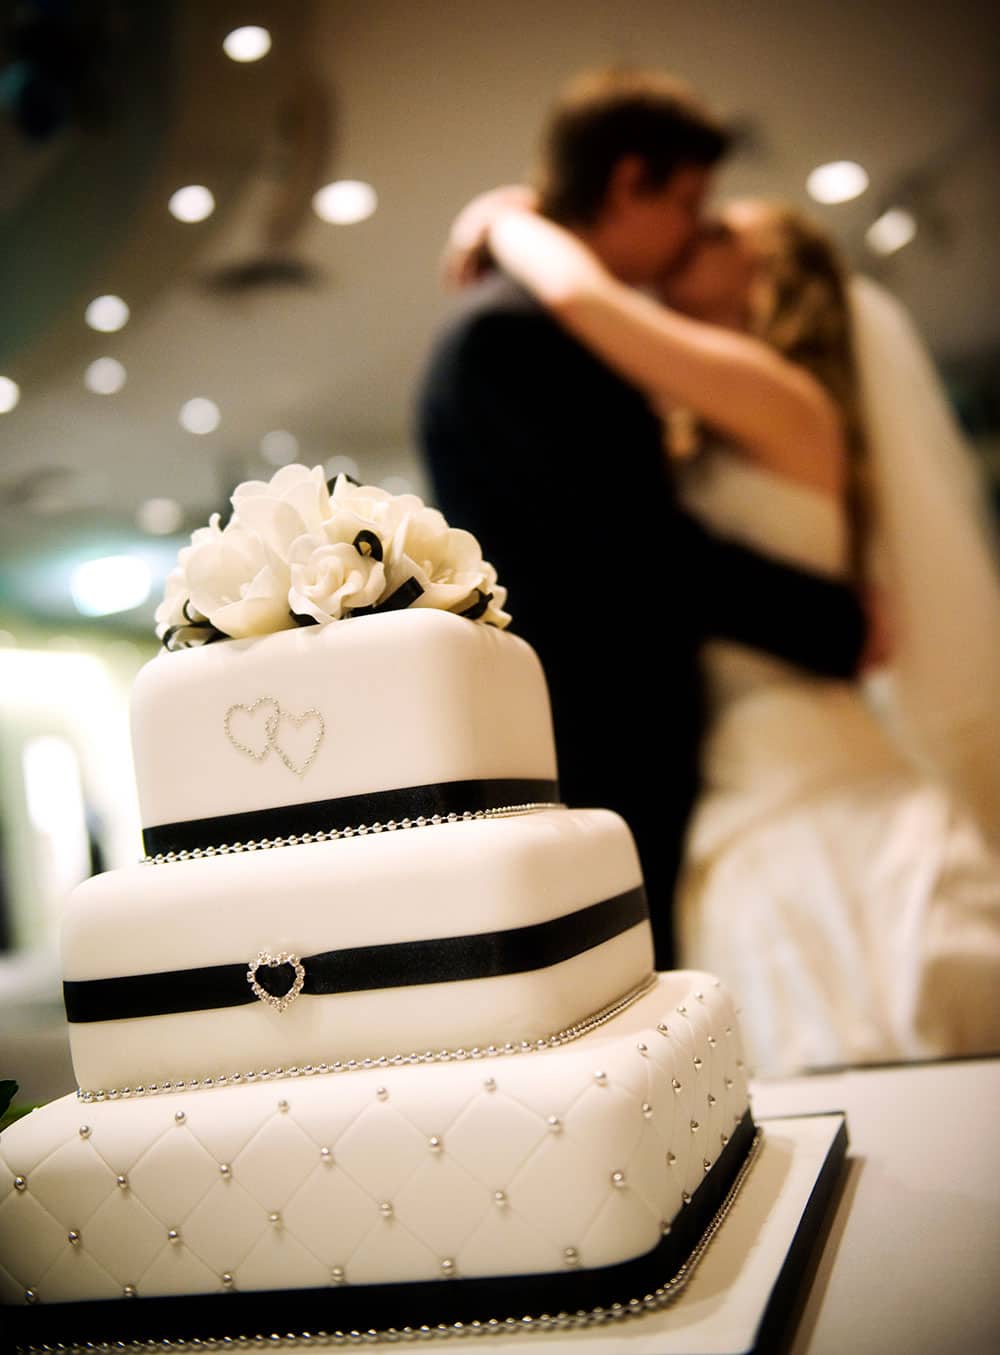 Classic black and white wedding cake with ribbon and diamonte details